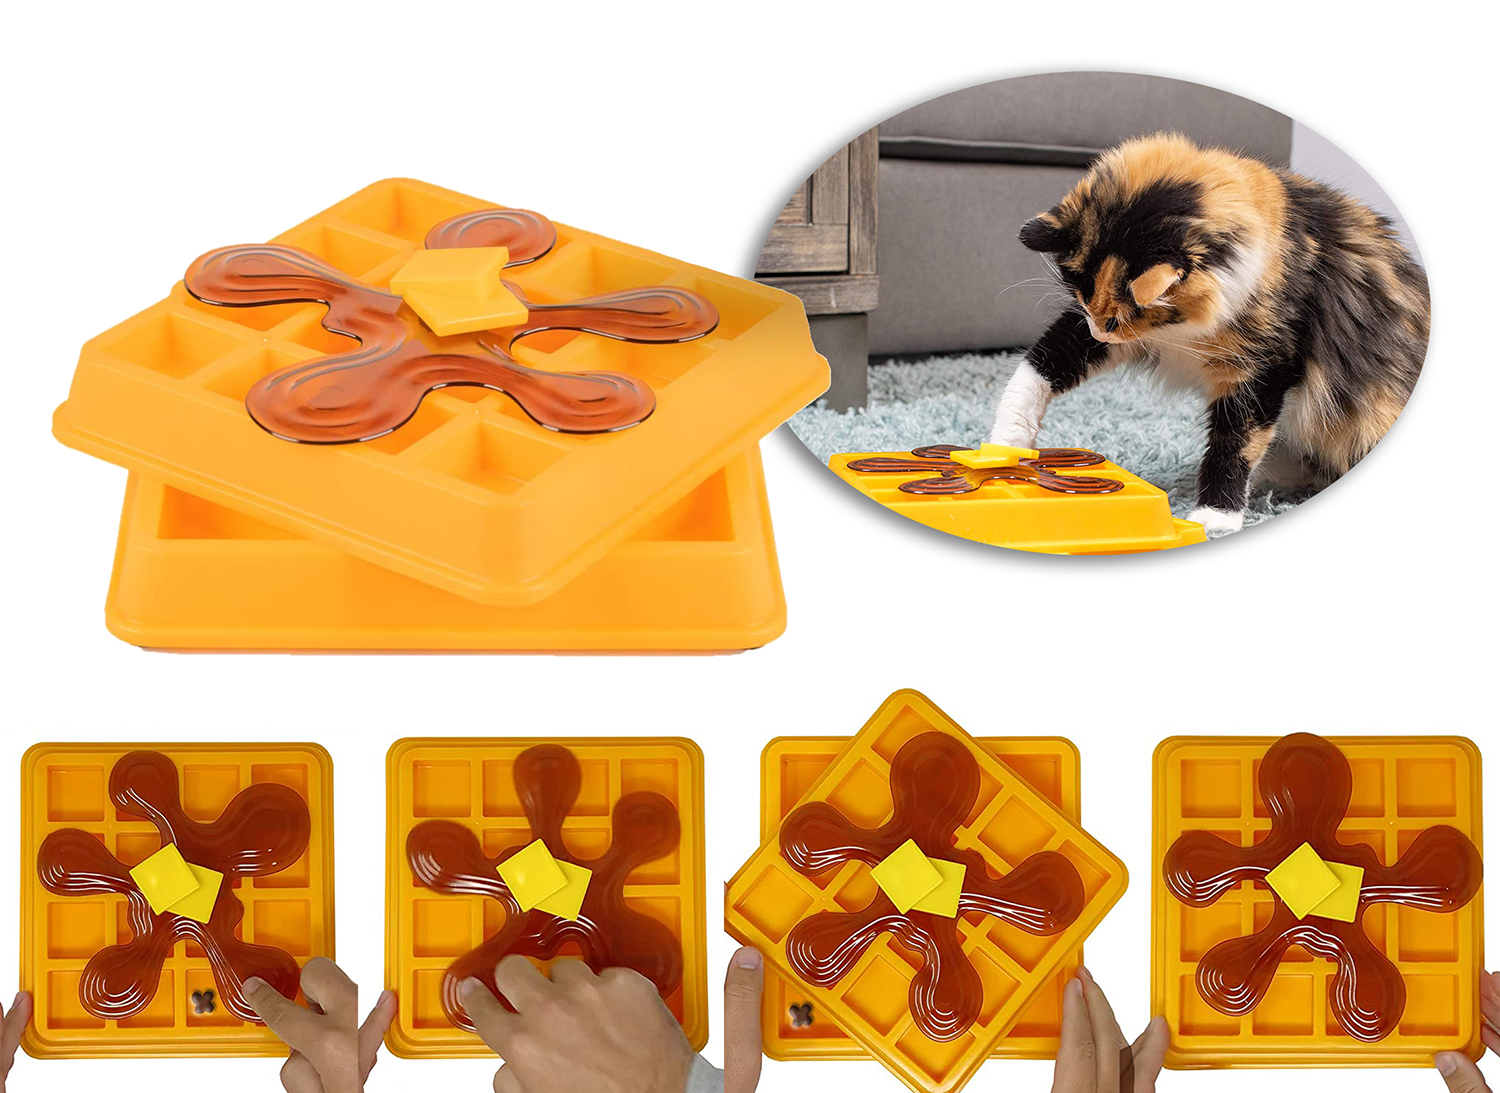 Giant waffle interactive puzzle toy for cats